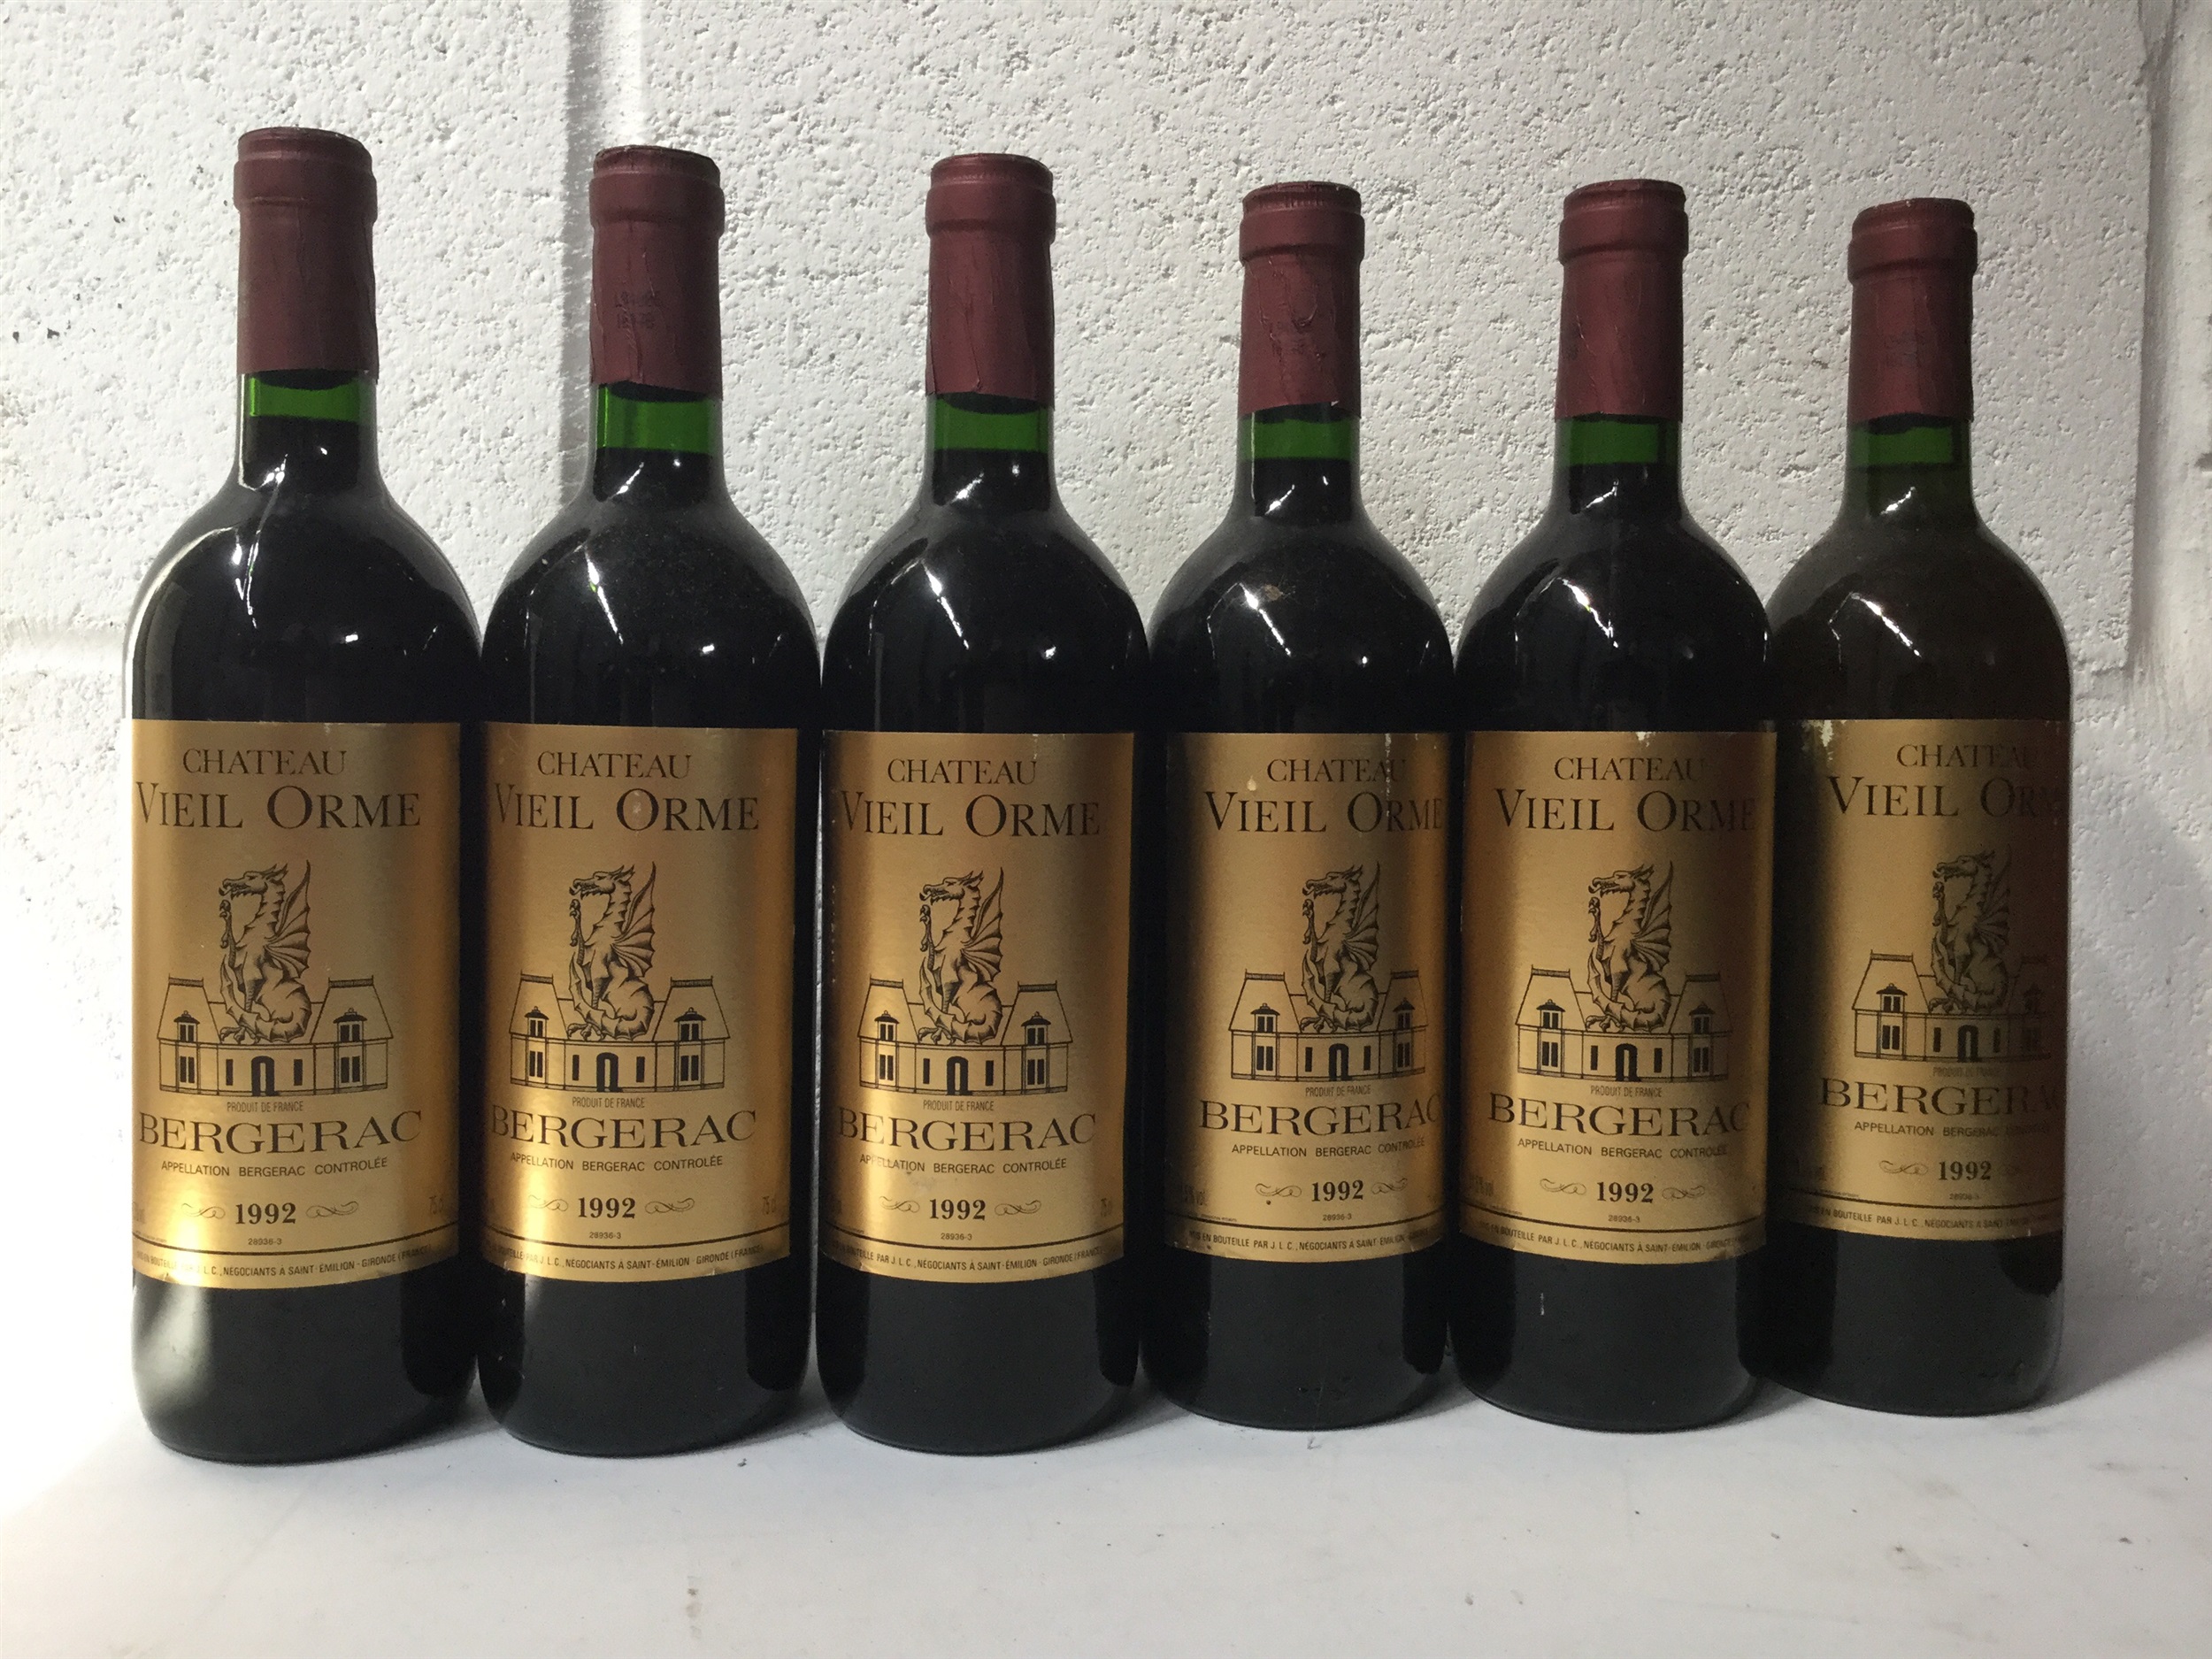 SIX BOTTLES OF CHATEAU VIEIL ORME 1992